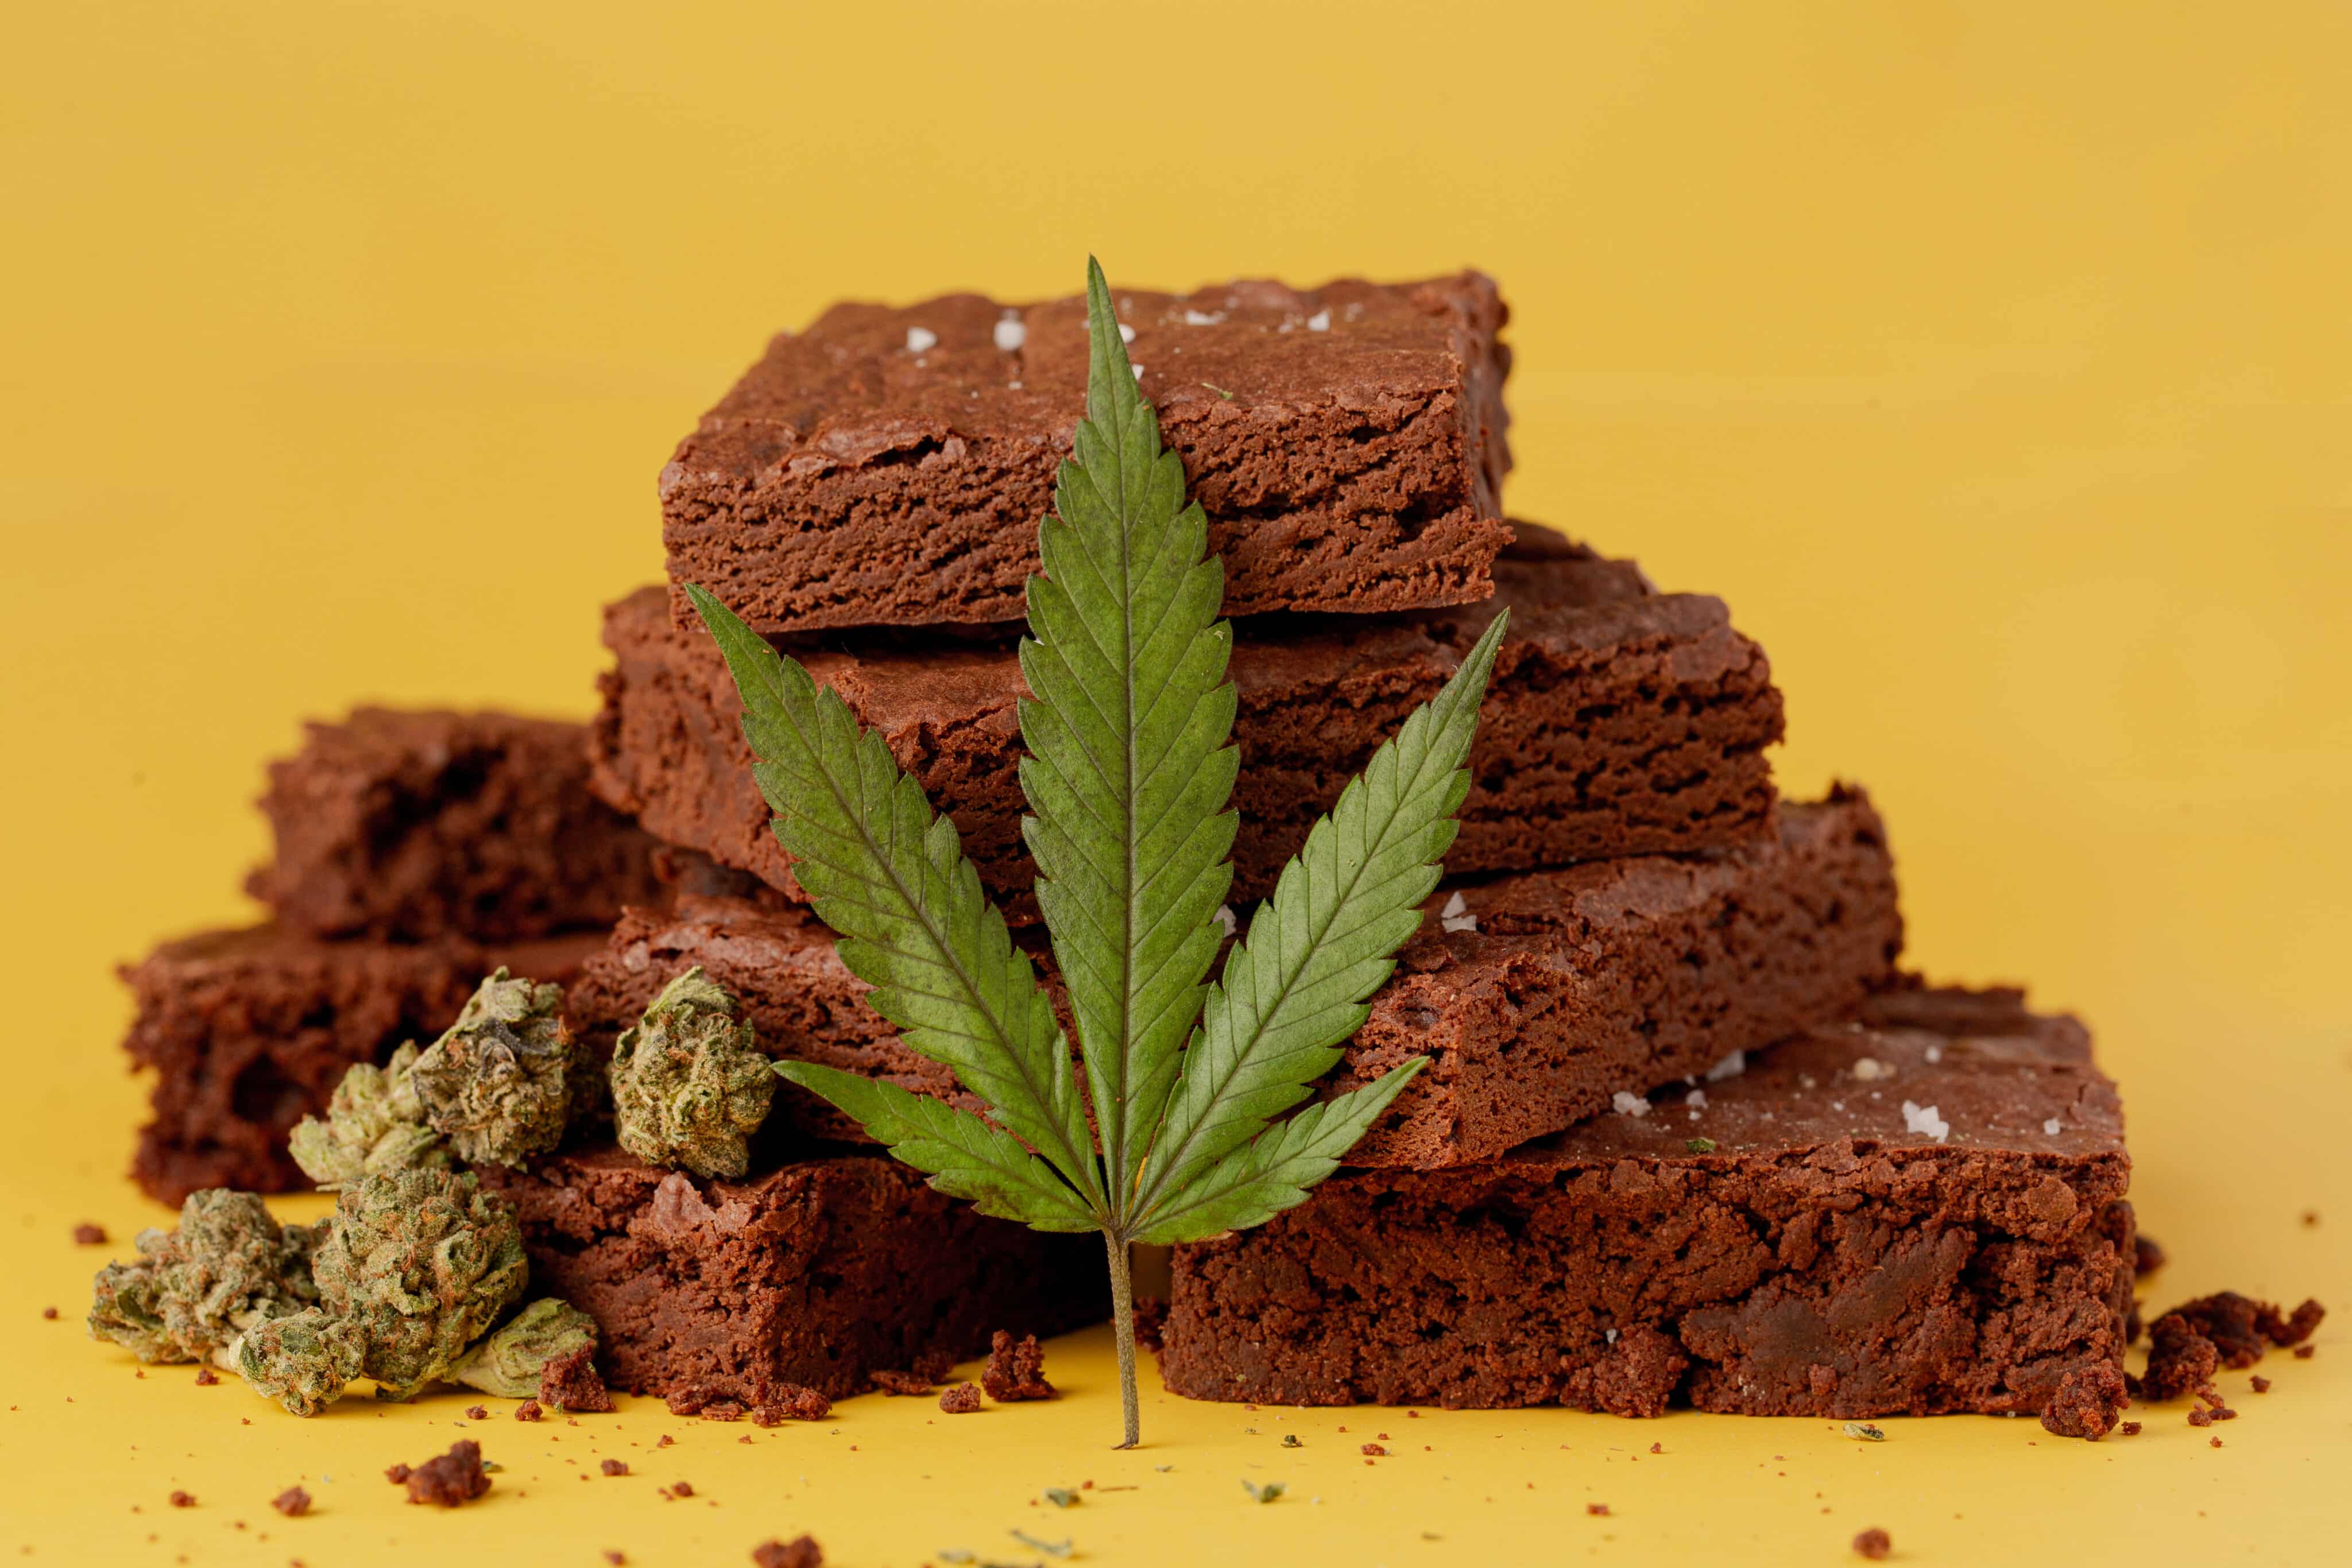 CBD May Magnify Effects of THC in Edibles, Johns Hopkins Study Suggests